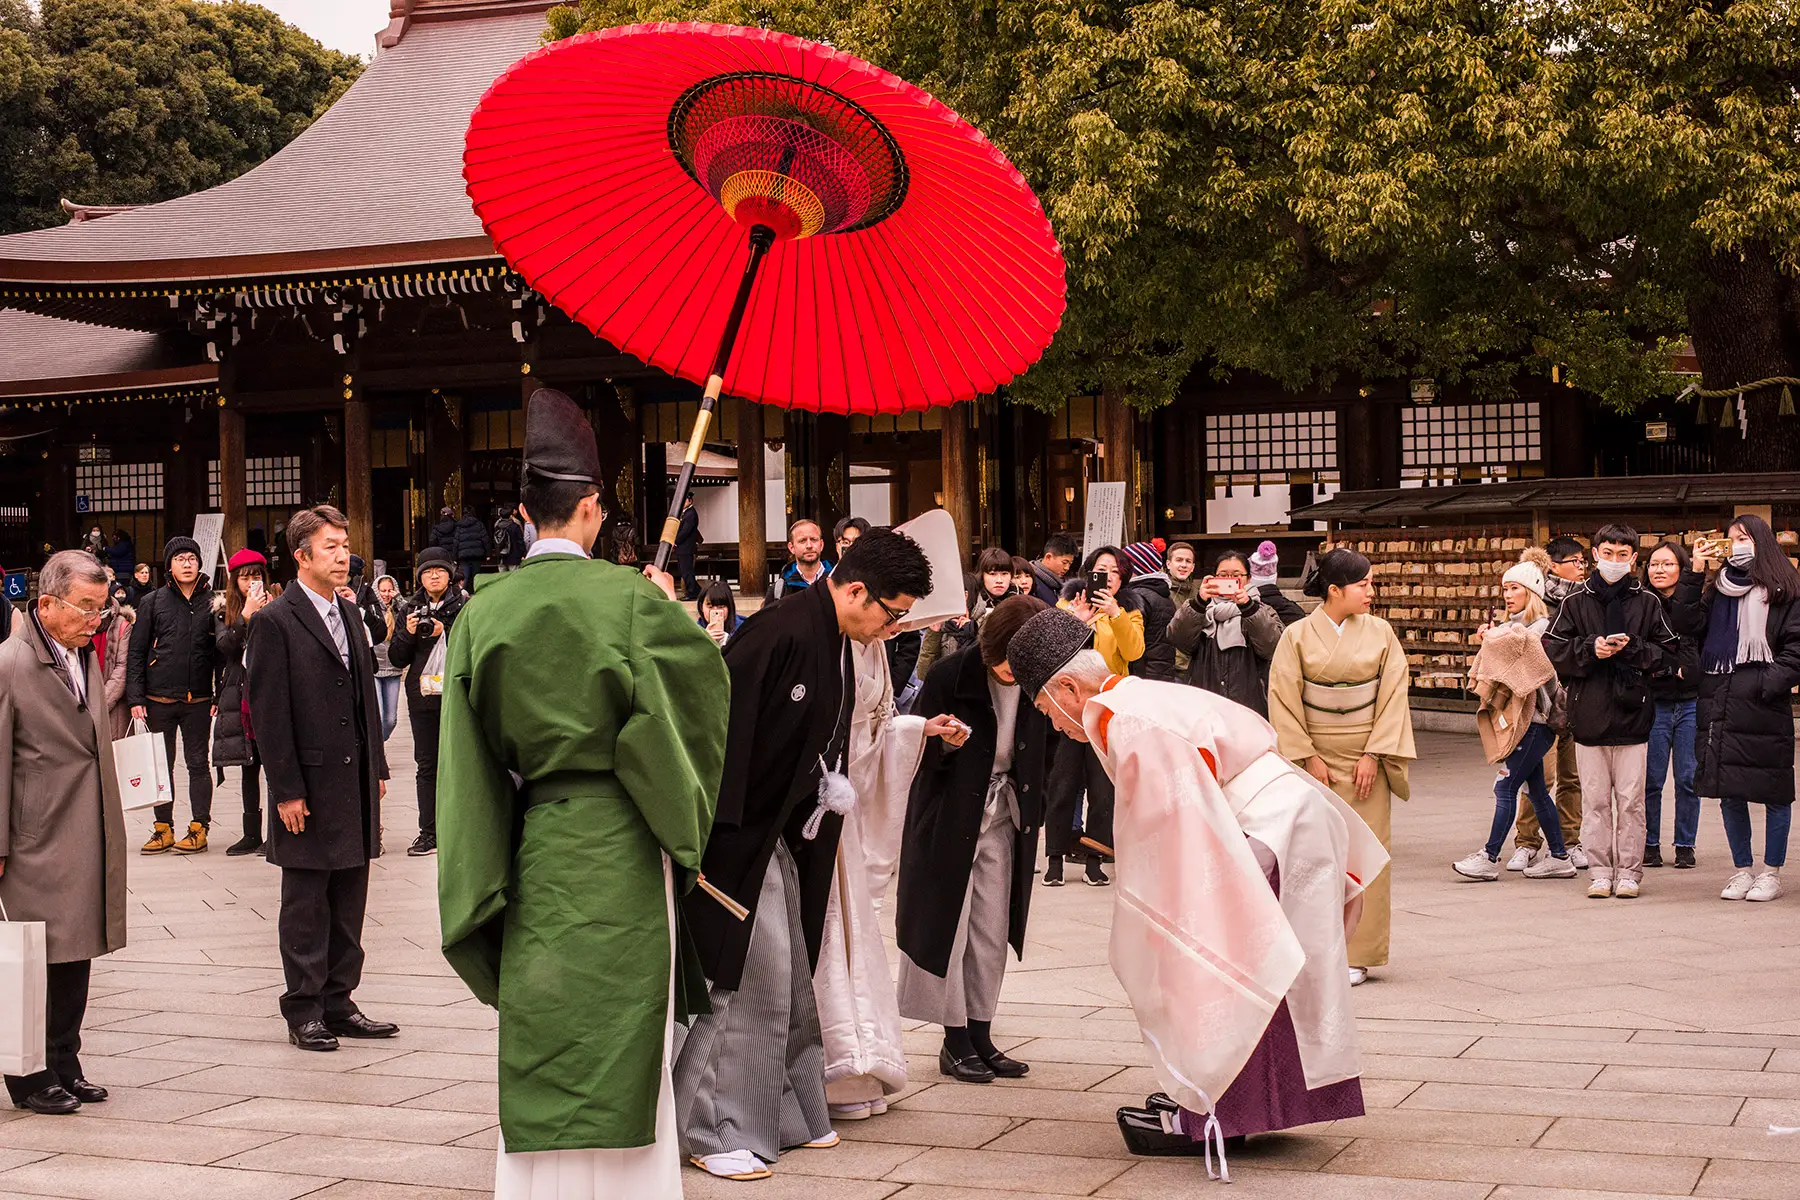 A traditional Japanese wedding ceremony outside a temple. The couple stands under a red umbrella.